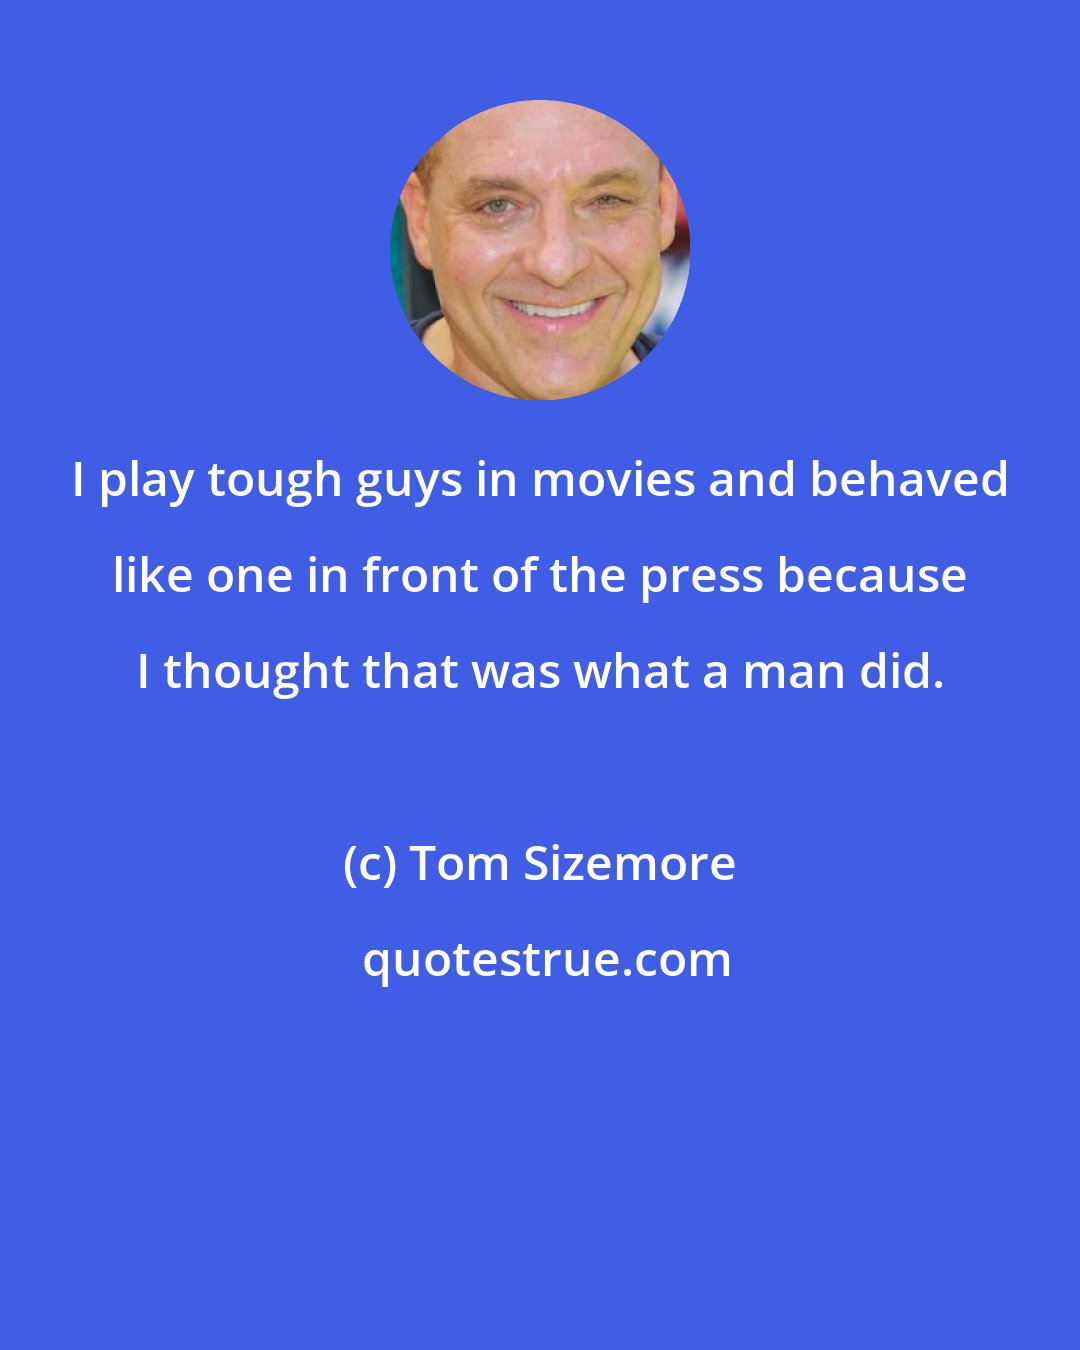 Tom Sizemore: I play tough guys in movies and behaved like one in front of the press because I thought that was what a man did.